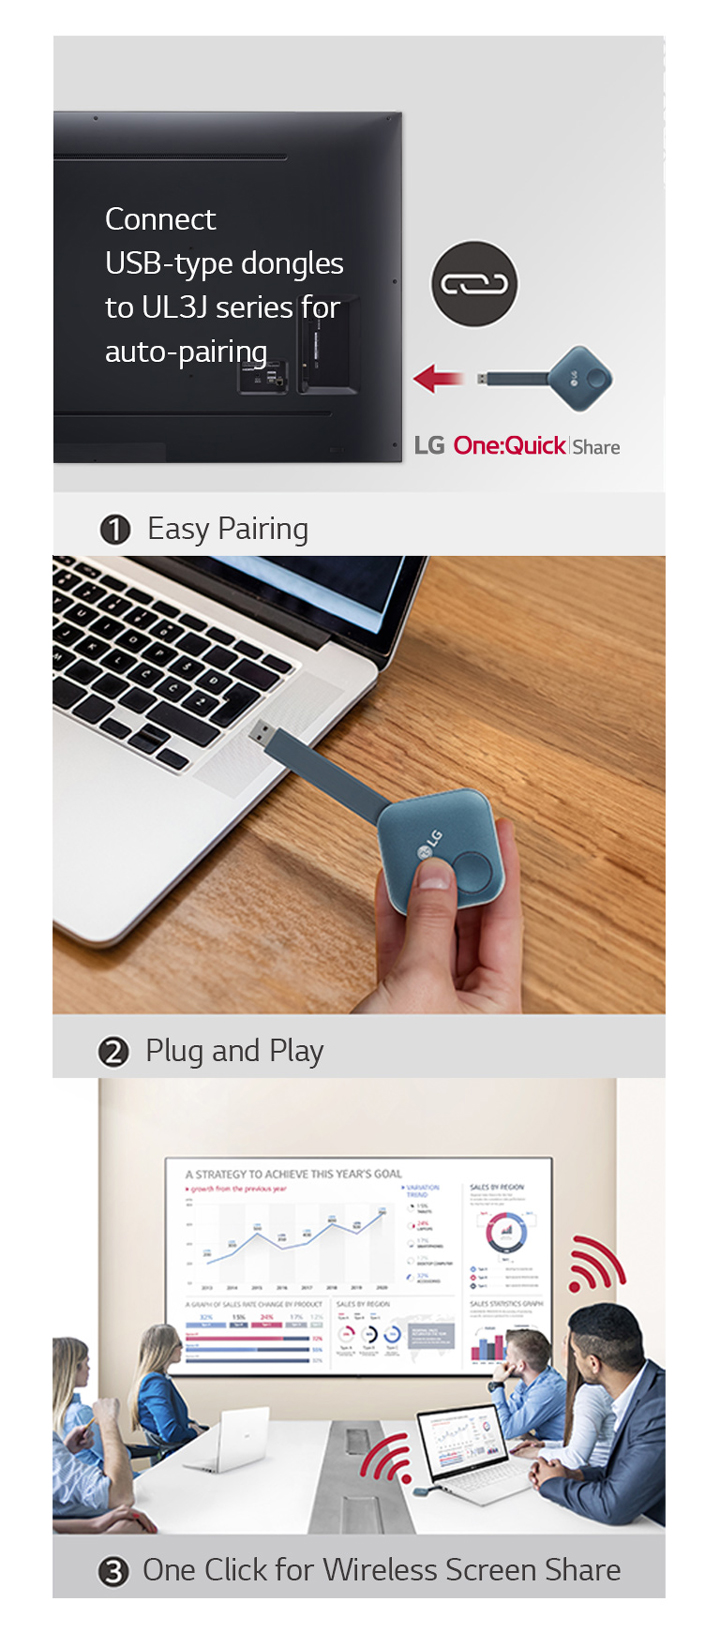 This consist of images displaying the 3-step instructions on installing LG One:Quick Share USB Dongle and sharing the personal screen. The first image pairs the USB Dongle and the LG signage. The second image describes a person holding the USB dongle, attempting to connect it to the PC. The last image consists of people having a meeting by connecting an USB dongle device to a laptop, then sharing the screen through the UL3J on the wall.